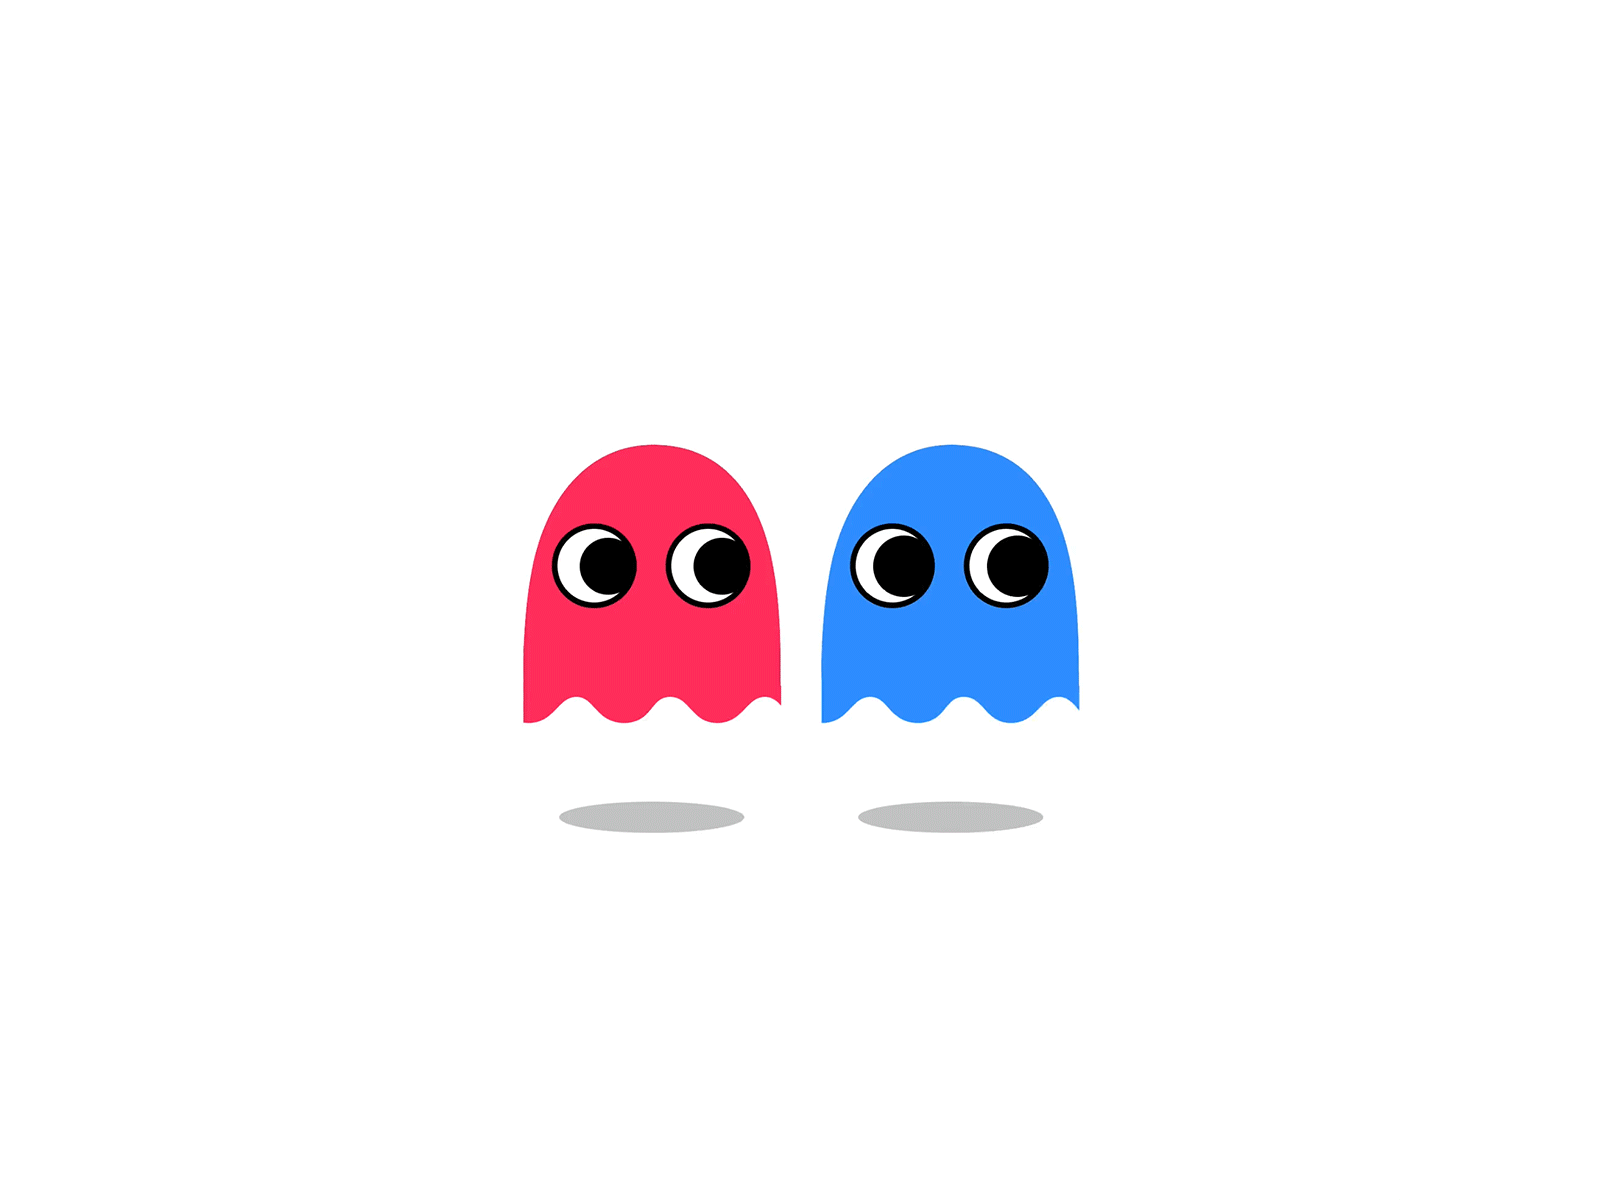 Pac-man animation chilltober game ghost illustration inktober inktober2019 invision studio invisionstudio pacman videogame